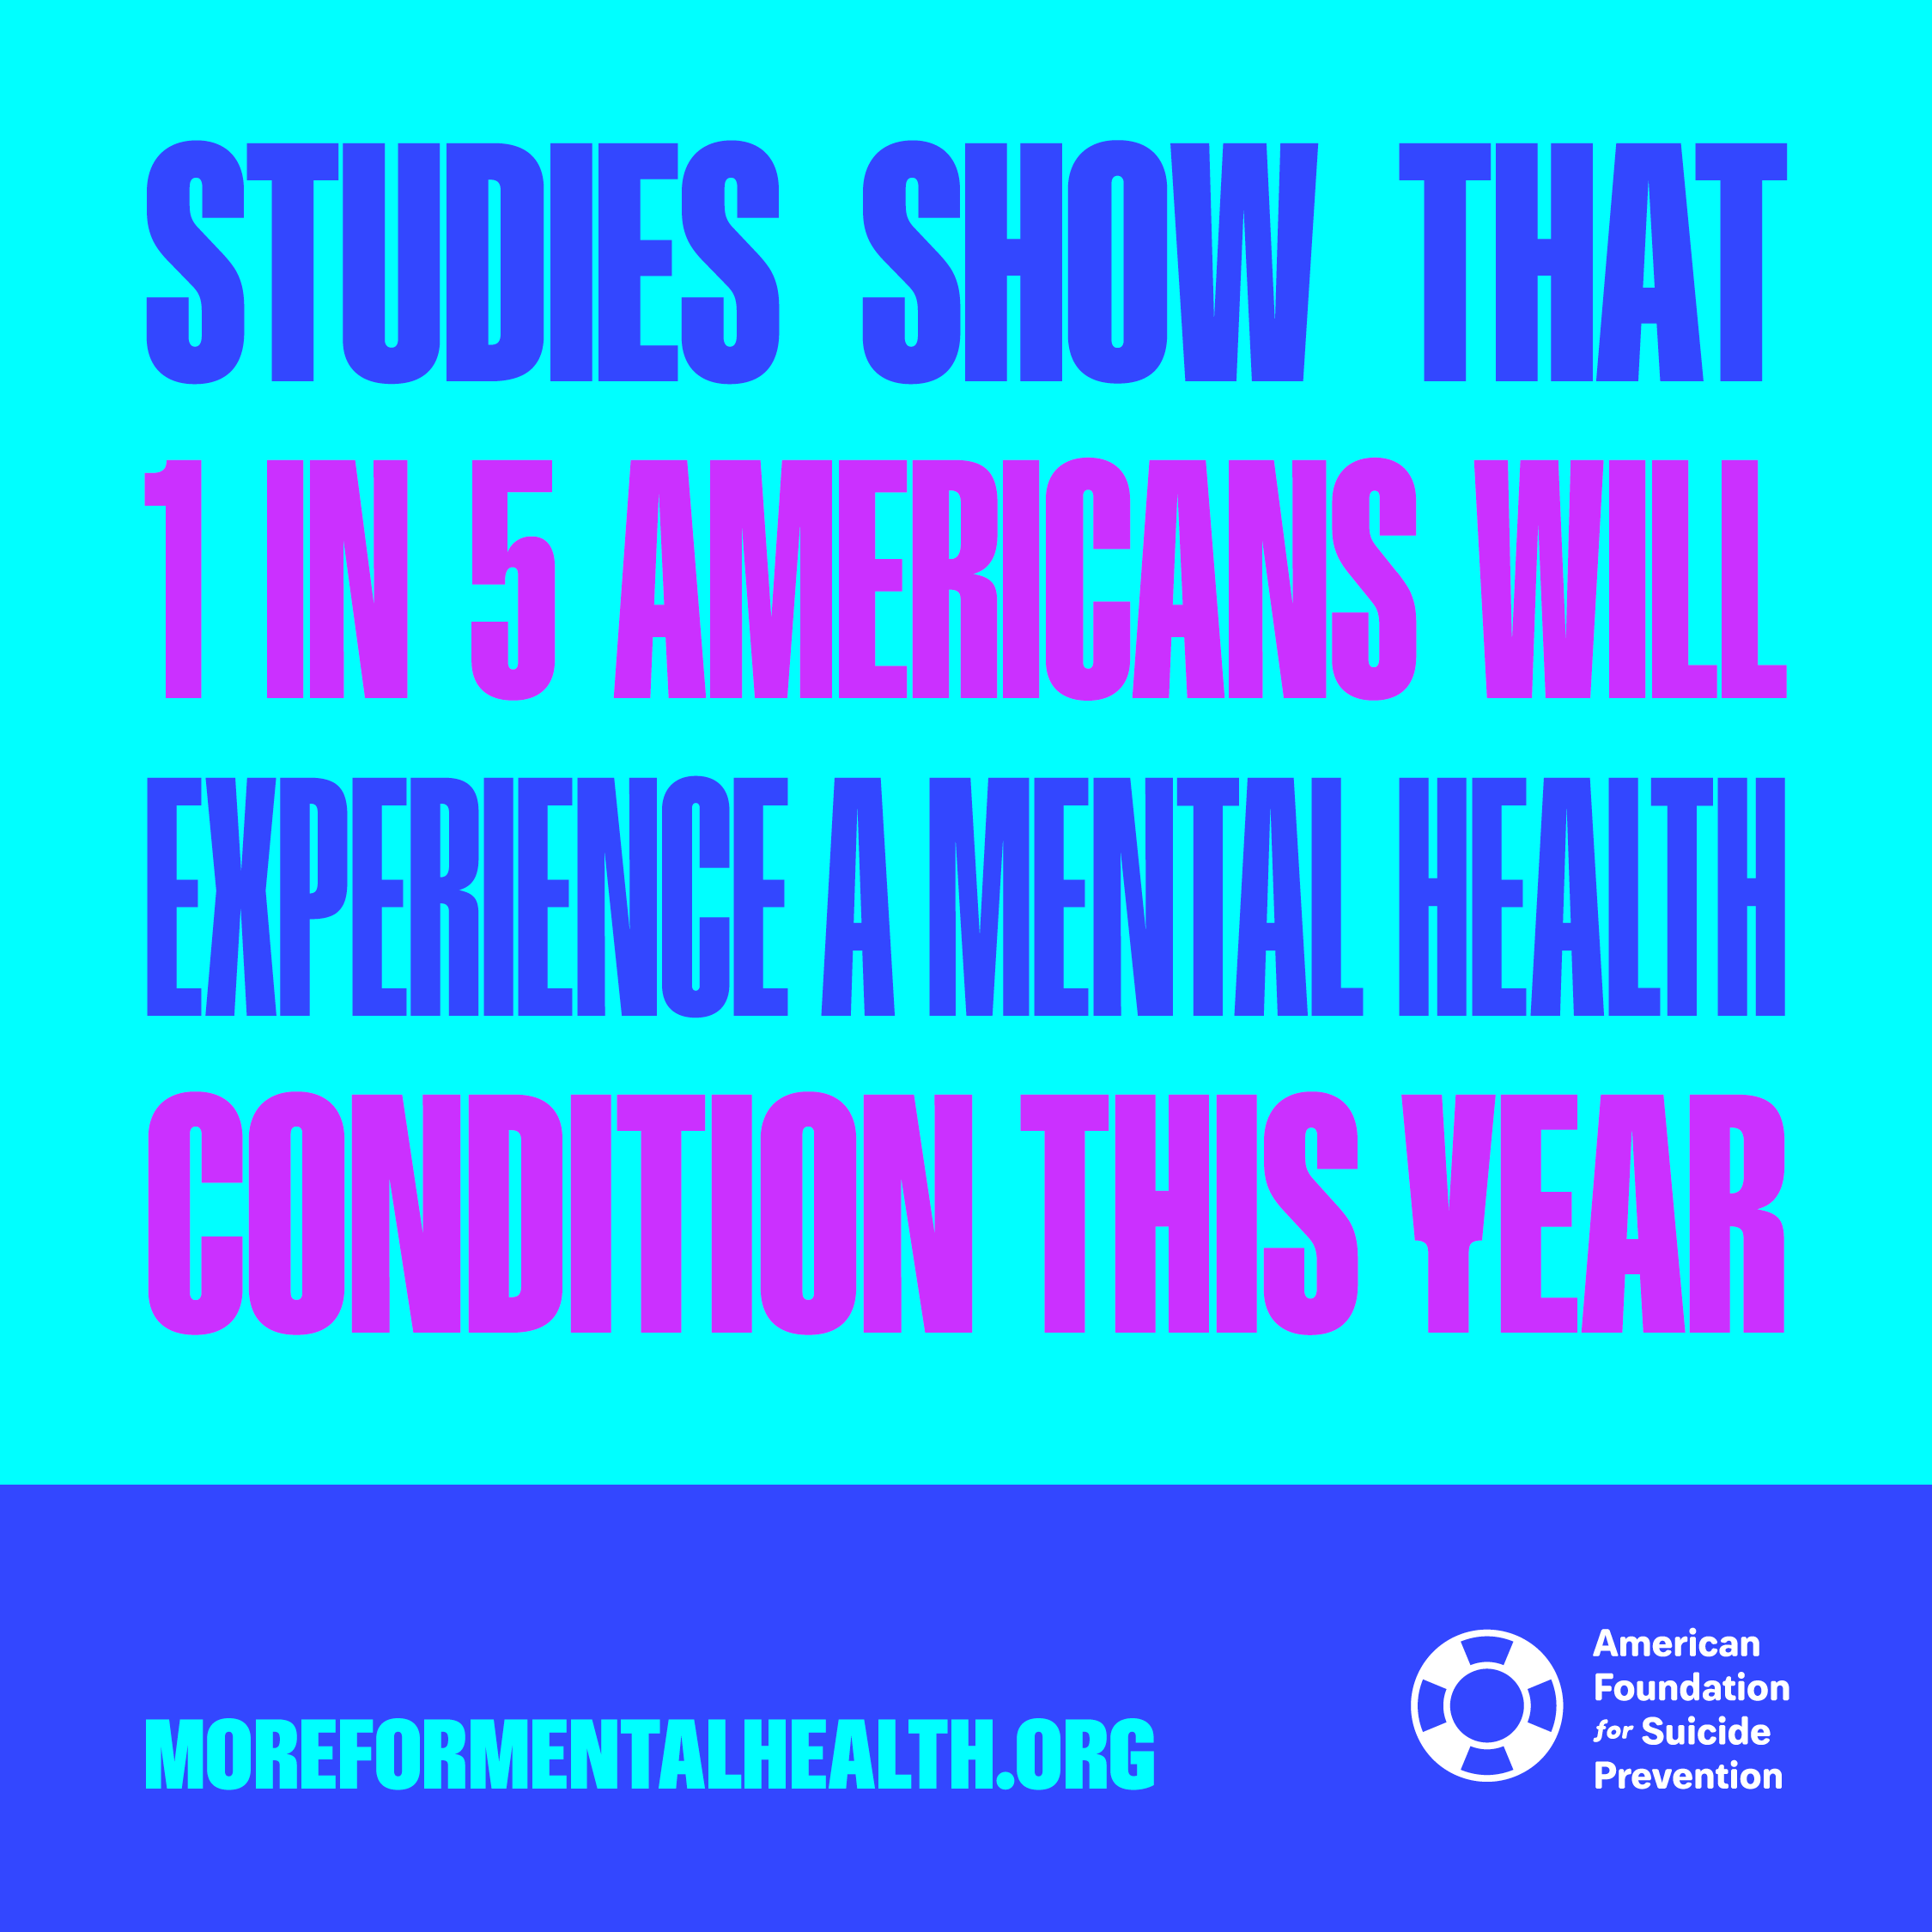 Studies show that 1 in 5 Americans will experience a mental health condition this year